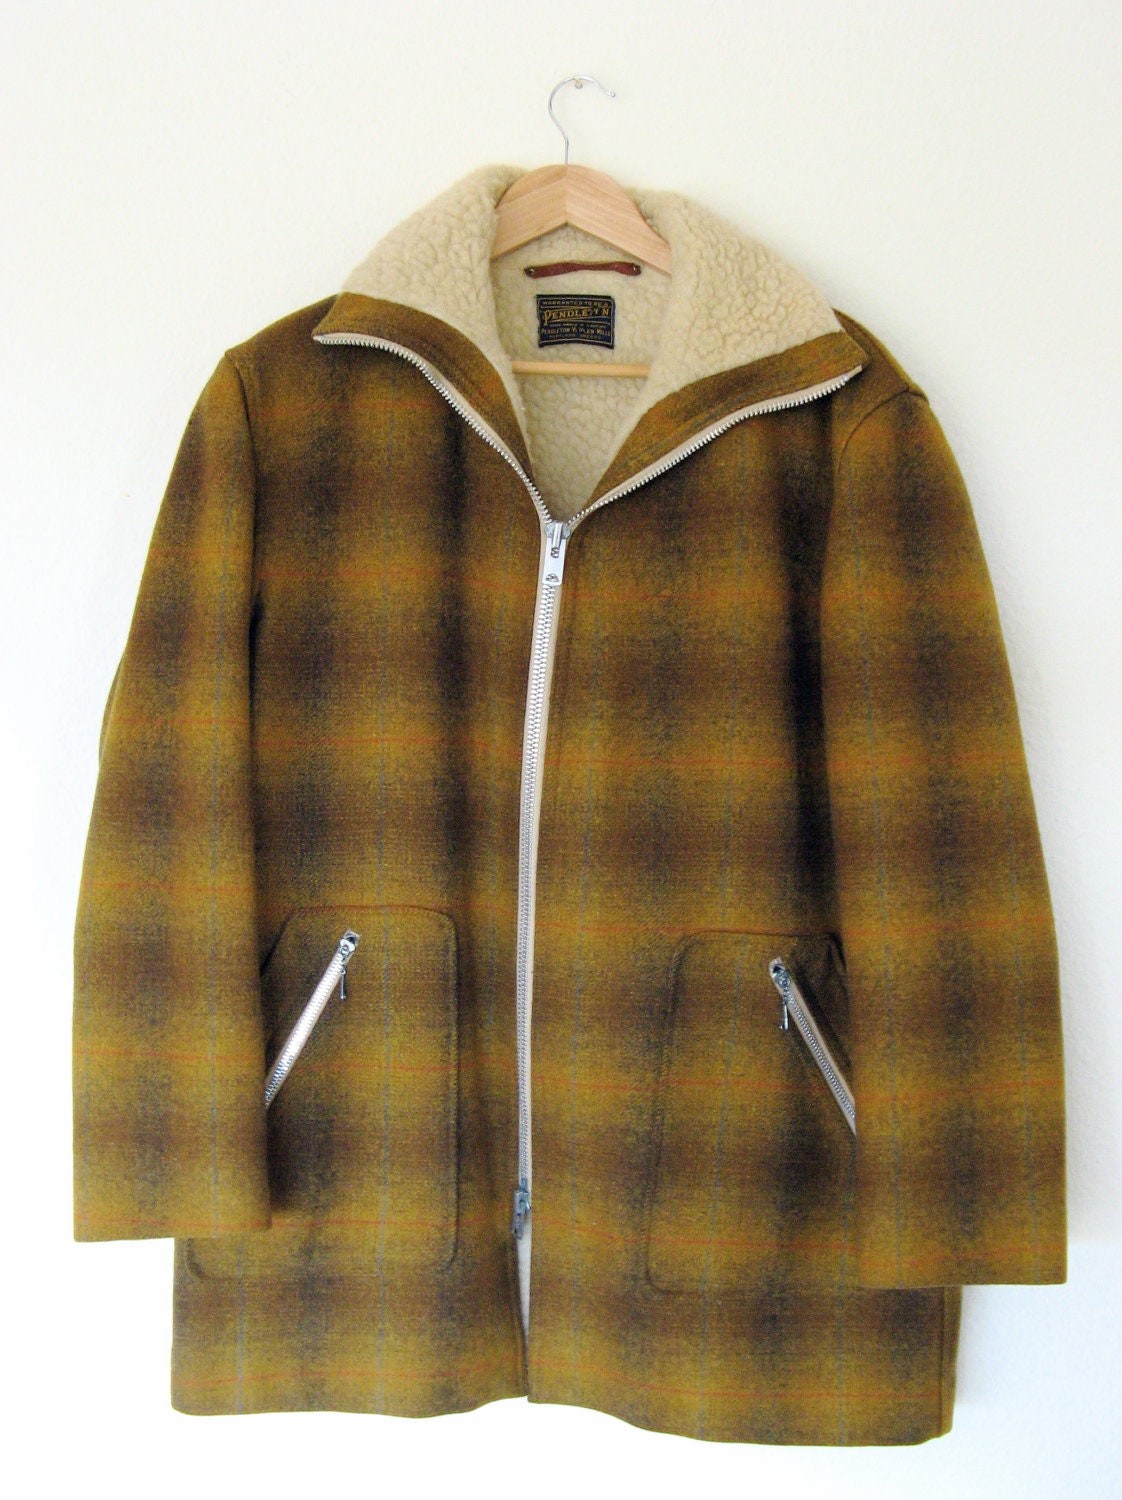 SALE-Vintage Plaid Wool Pendleton Coat with Fleece by MarketHome